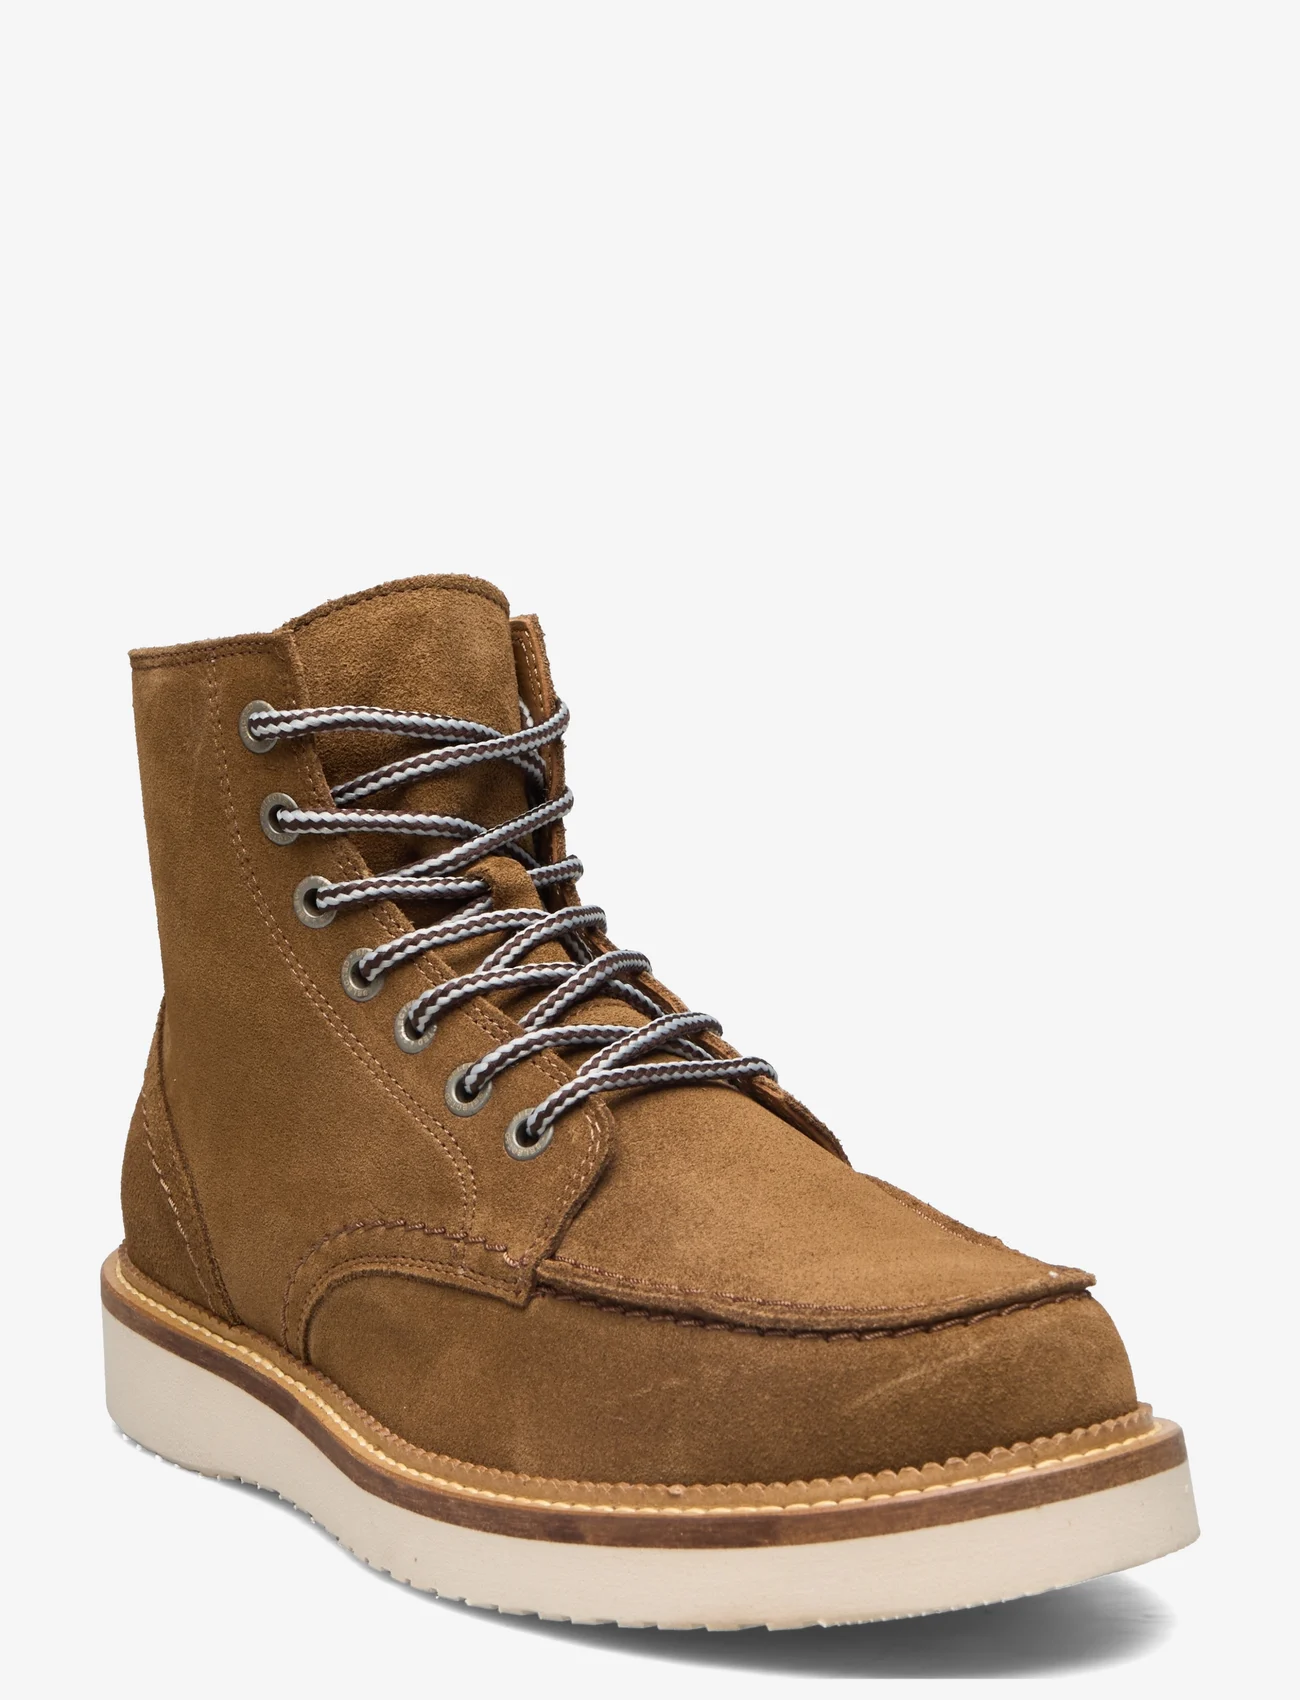 Selected Homme - SLHTEO NEW SUEDE MOC-TOE BOOT B - lace ups - tobacco brown - 0